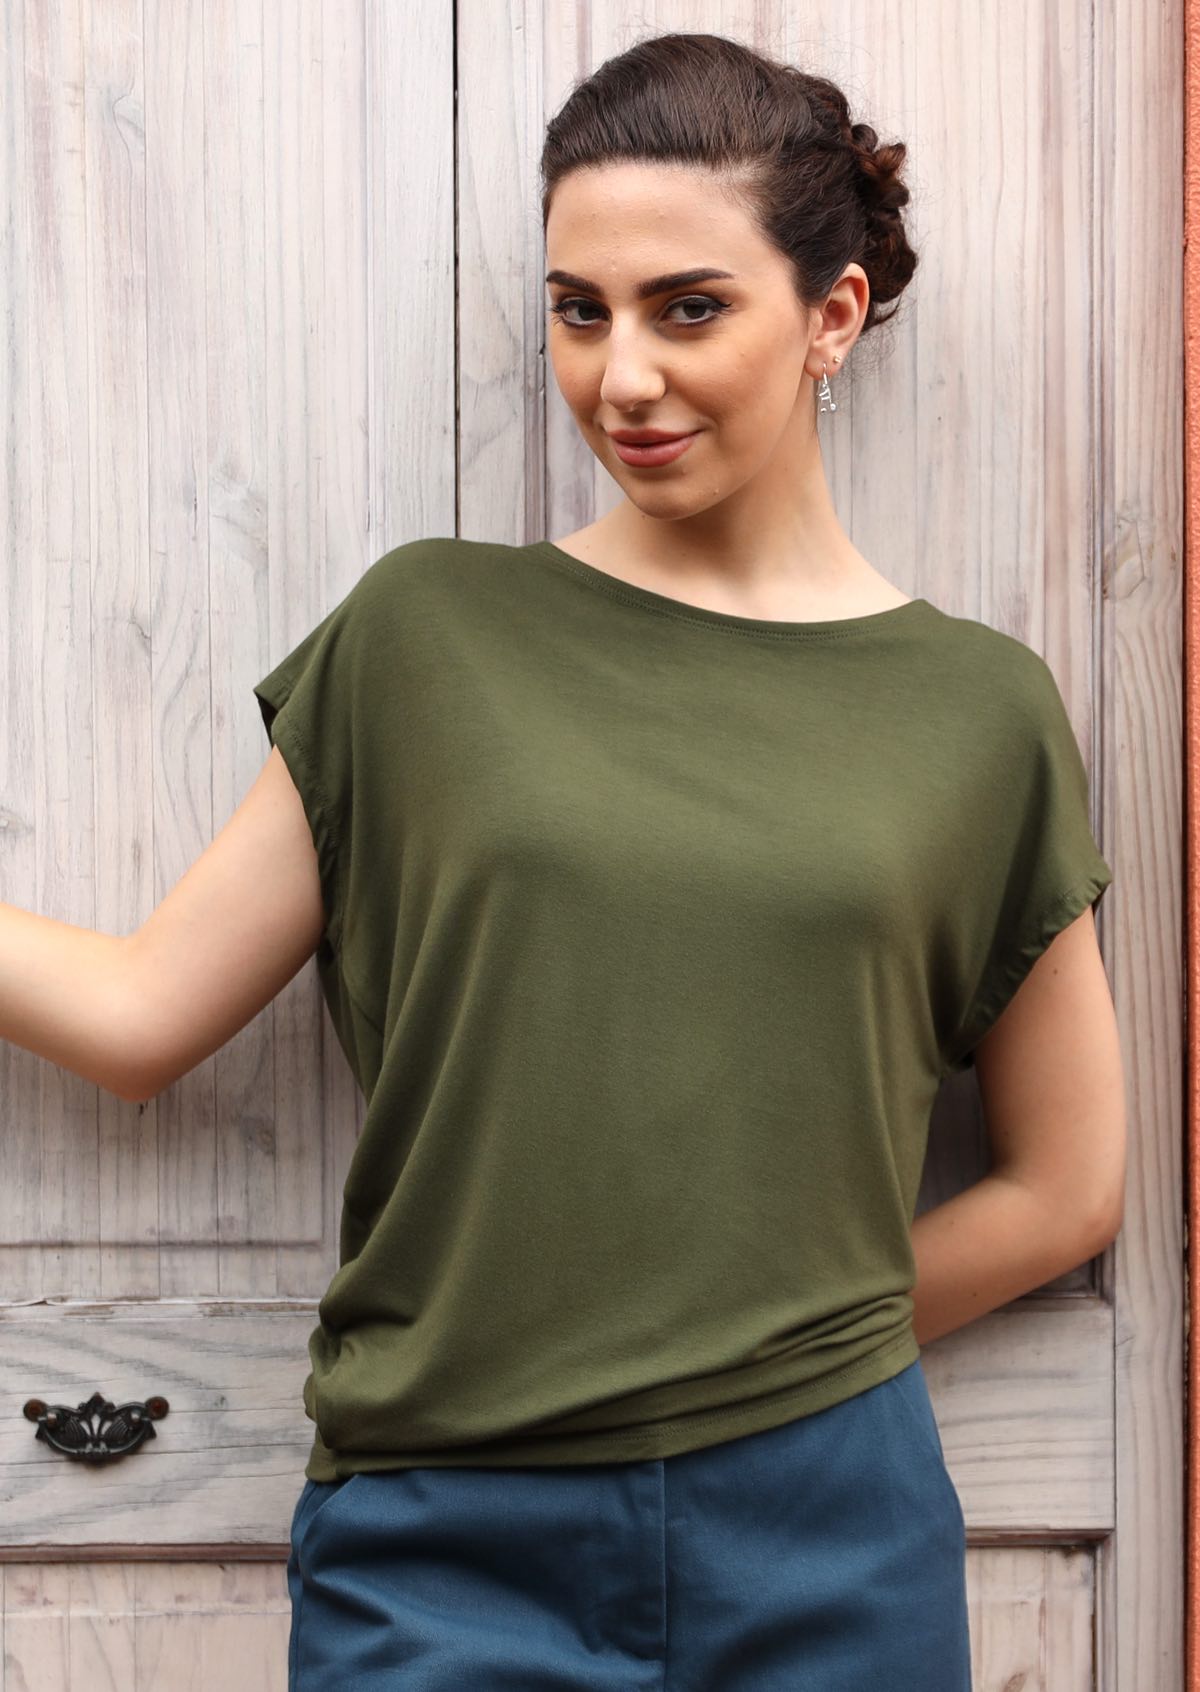 Woman wearing olive green rayon top